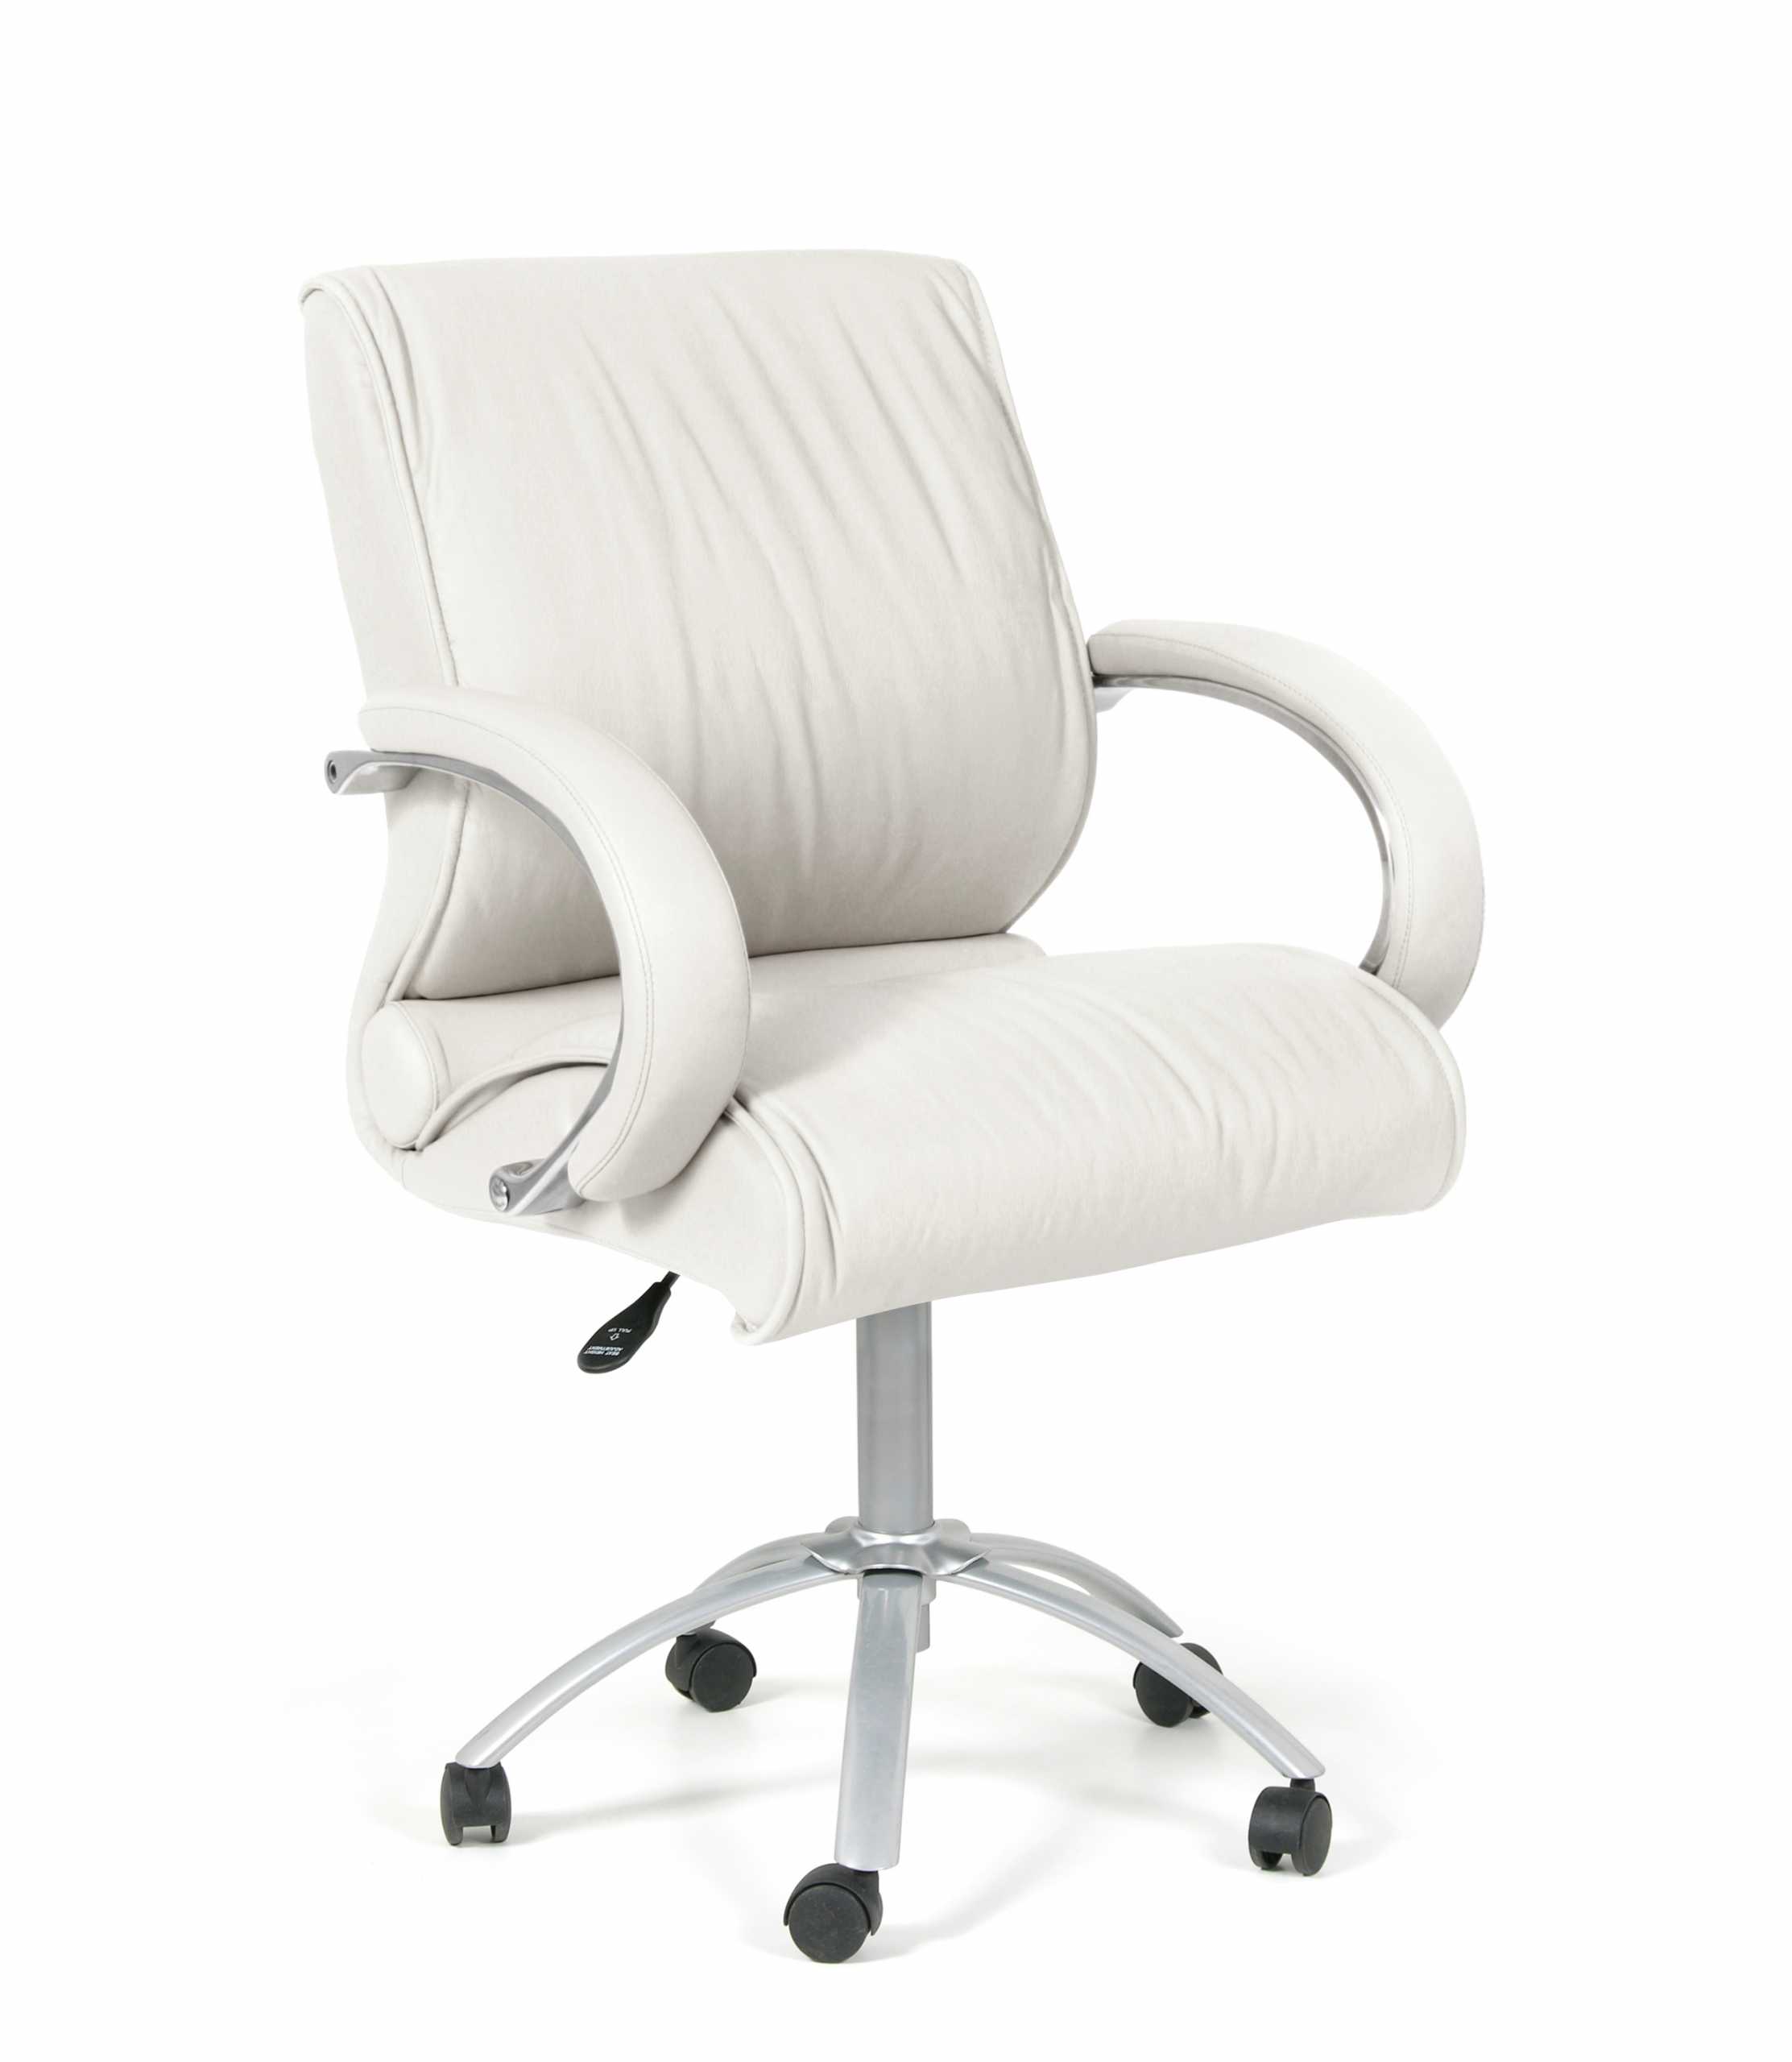 The office chair from white leather | My Decorative